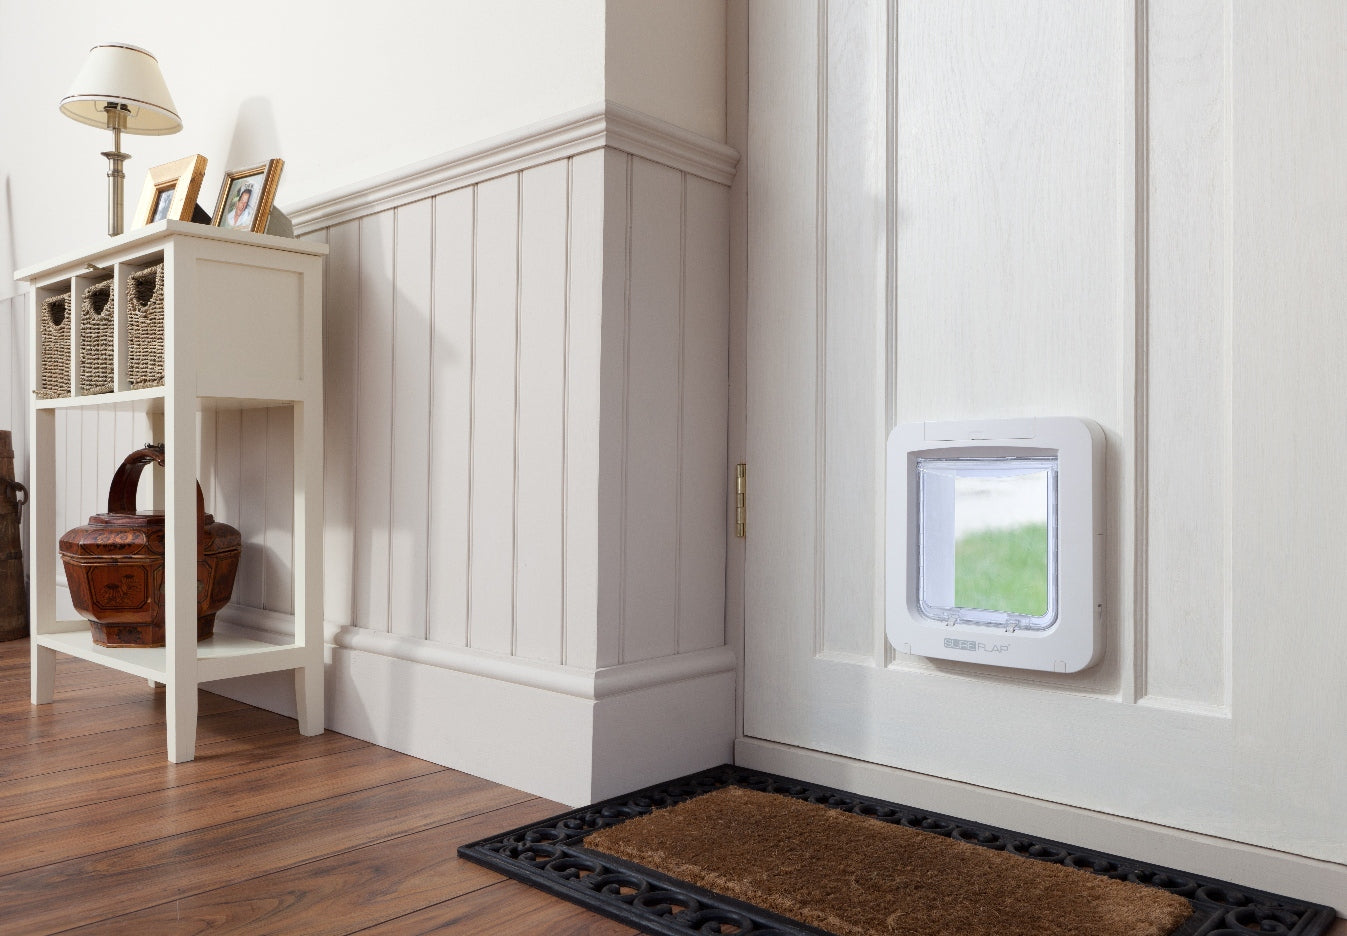 the Sureflap electronic microchip pet door installed into a wall